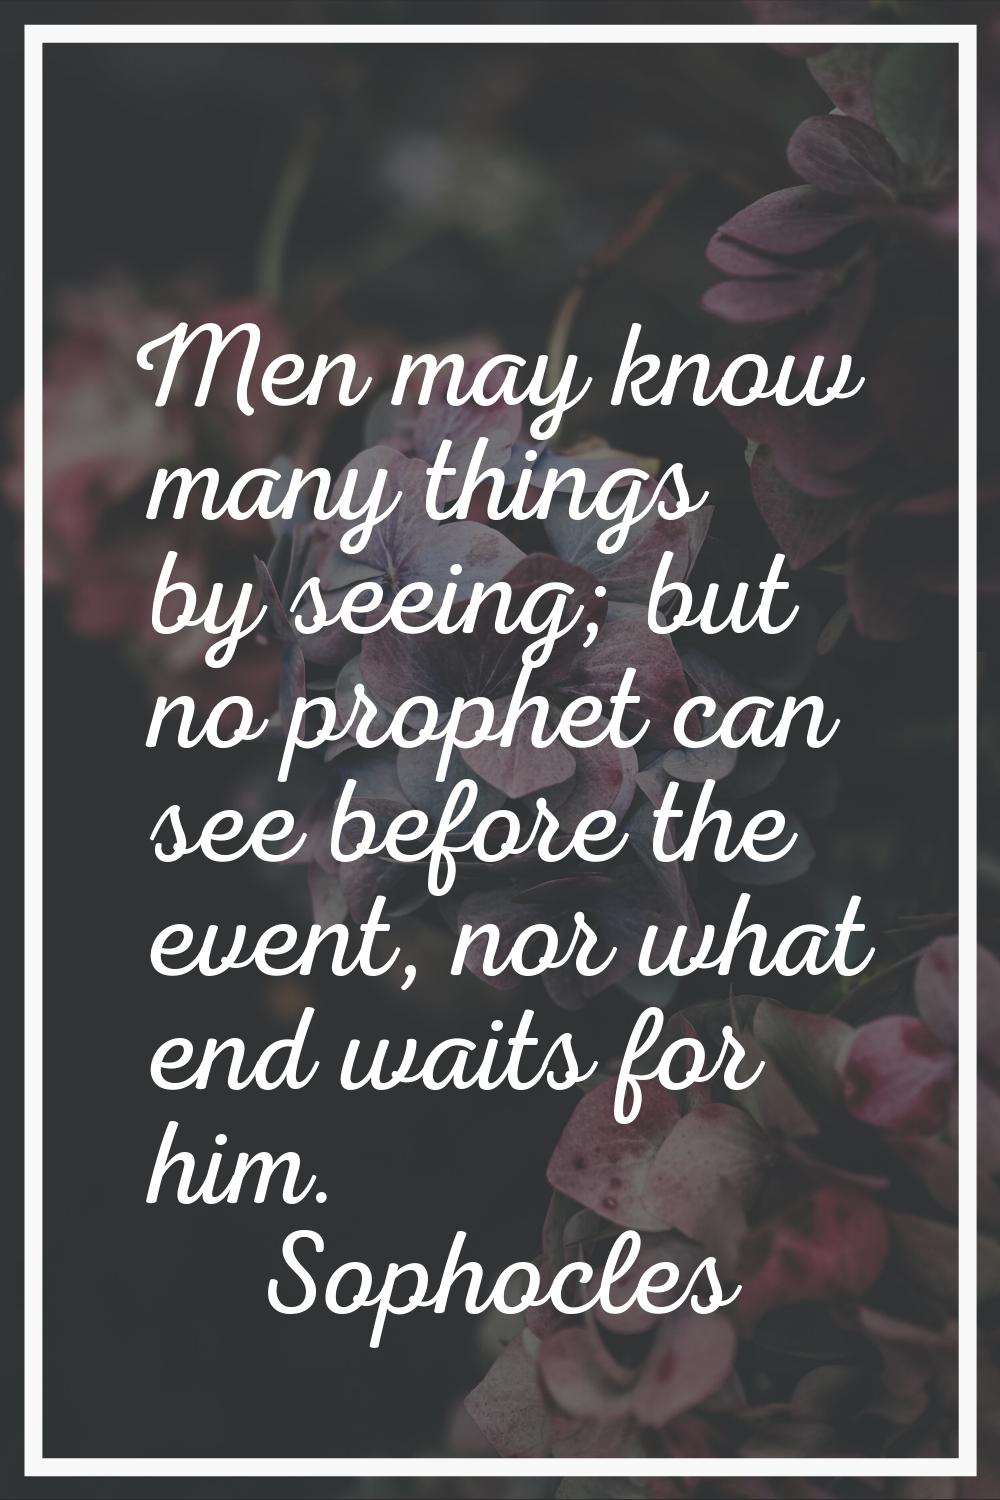 Men may know many things by seeing; but no prophet can see before the event, nor what end waits for